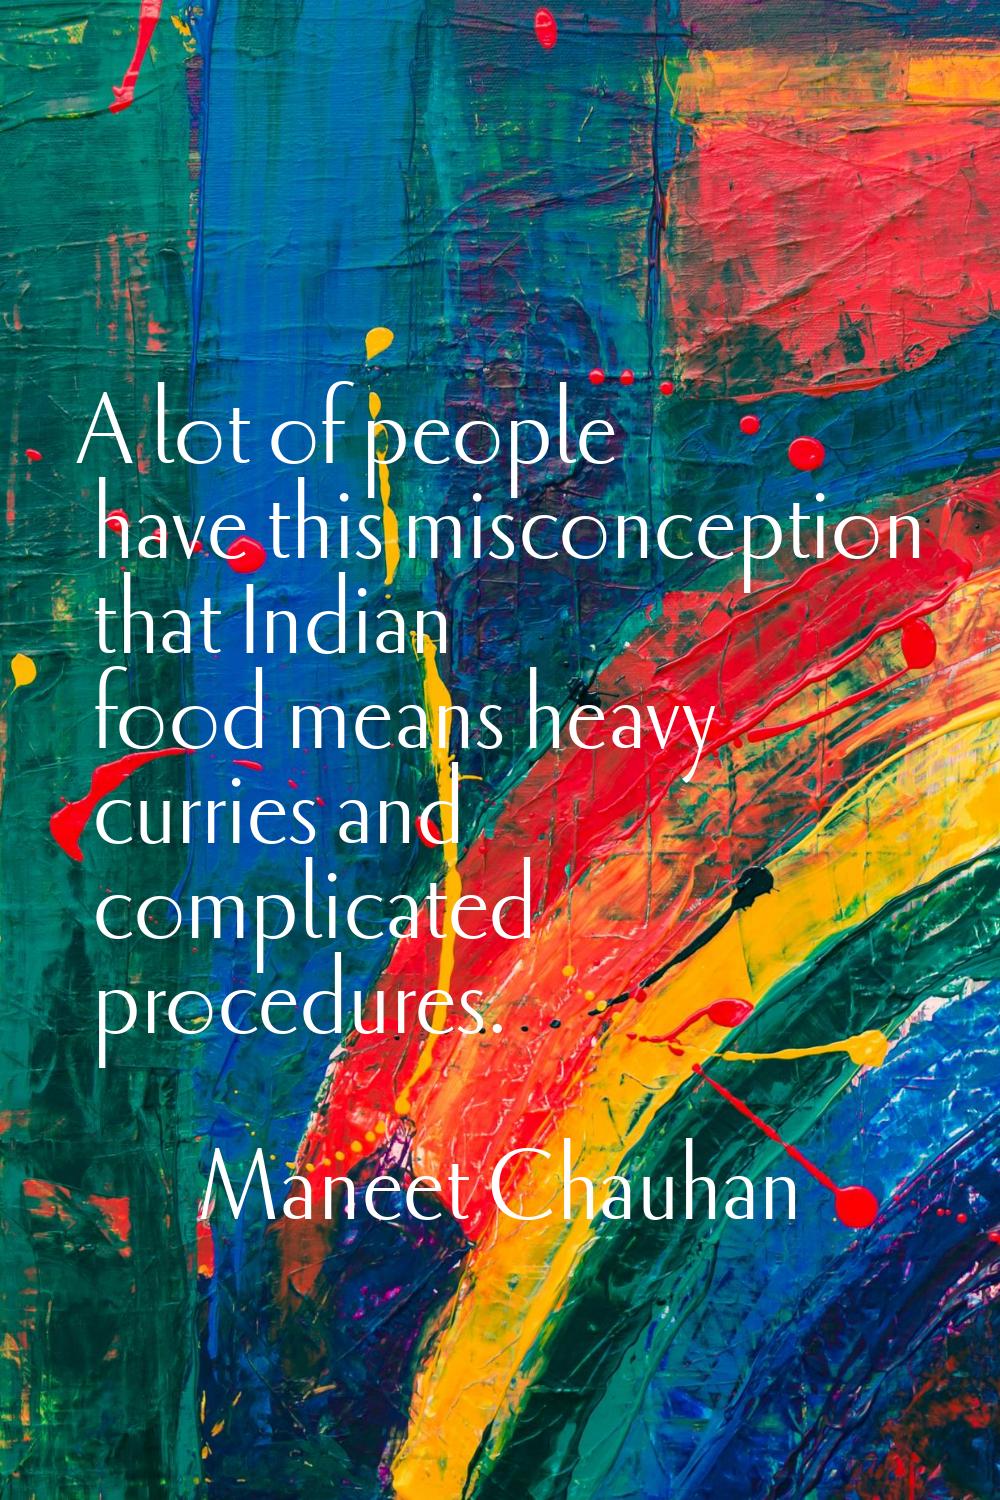 A lot of people have this misconception that Indian food means heavy curries and complicated proced